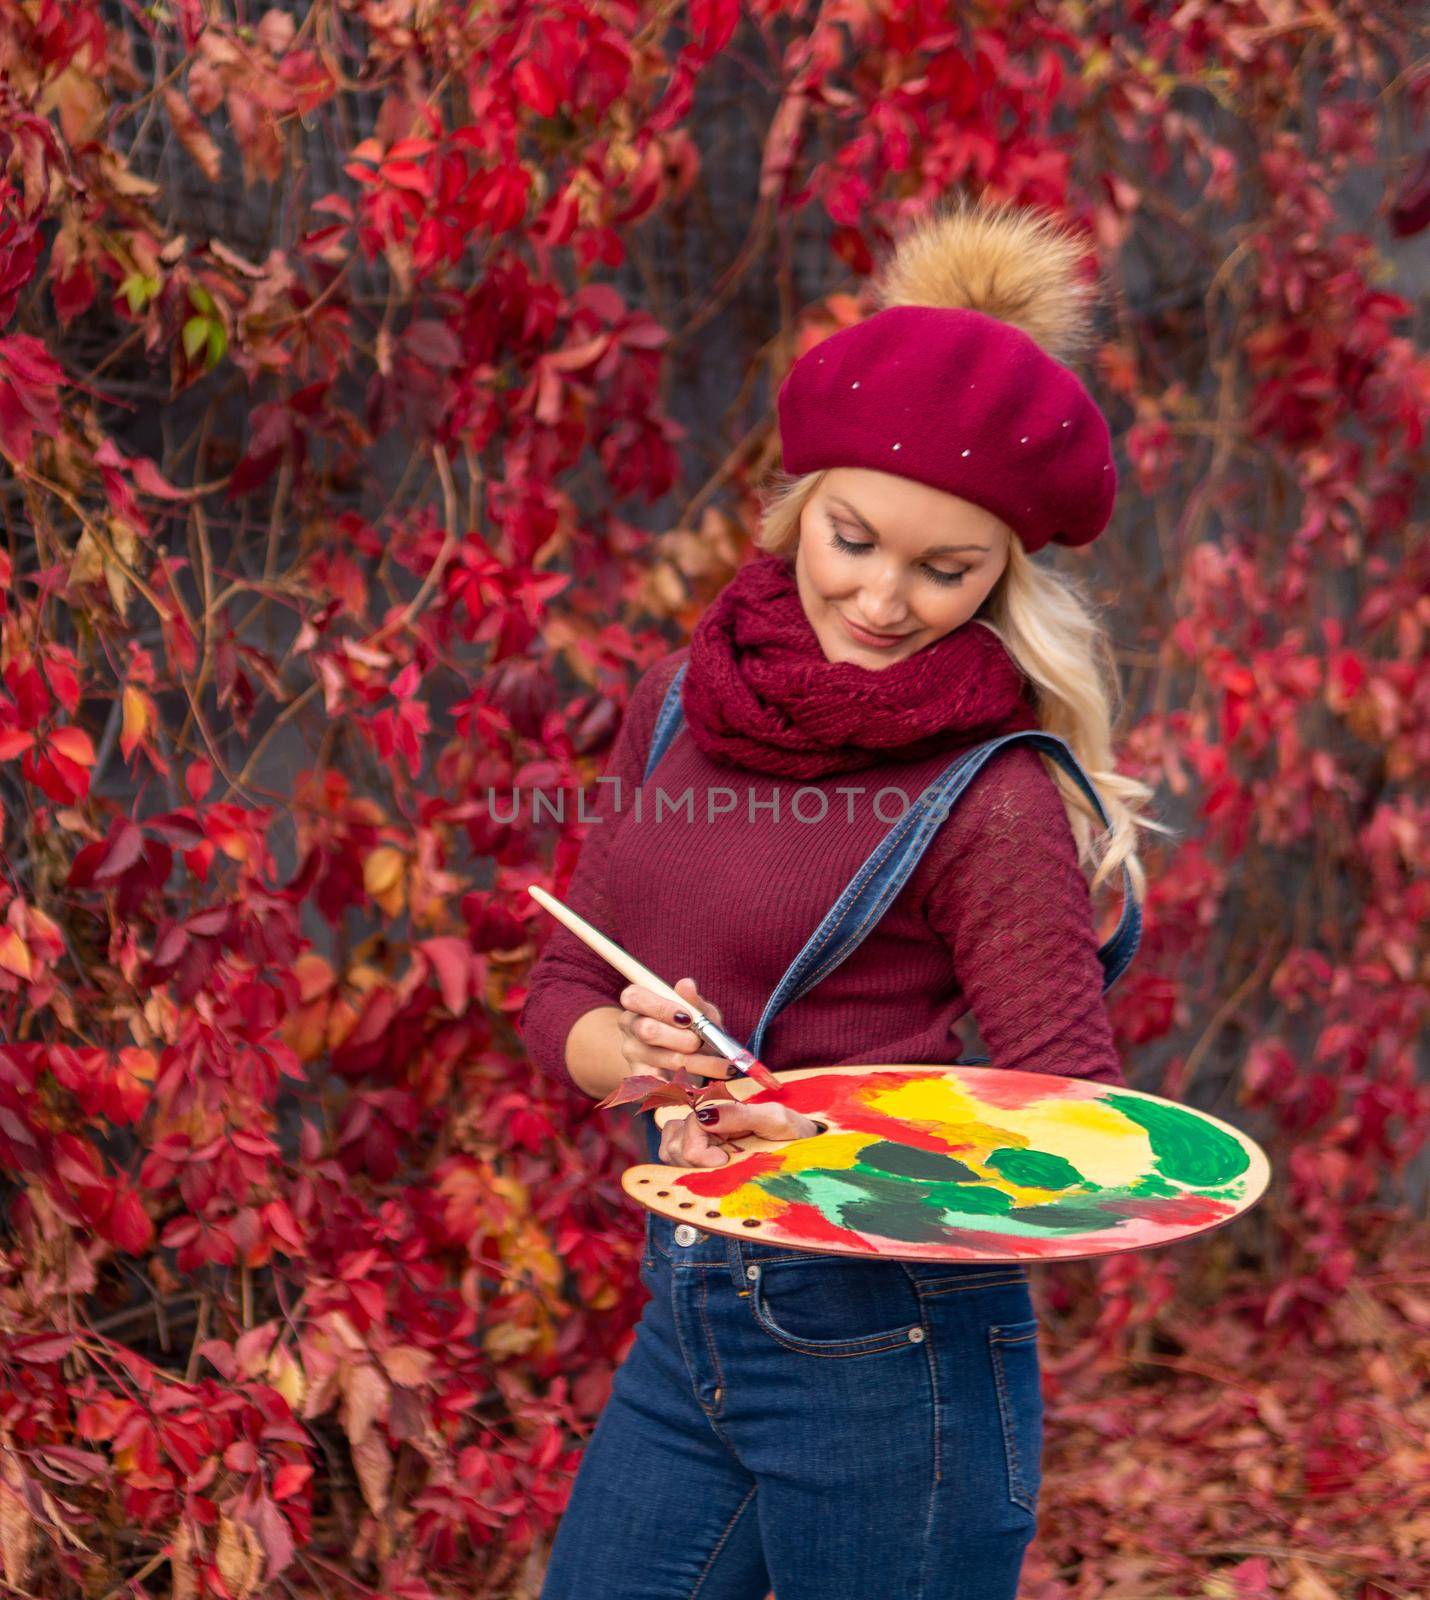 The artist paints red maple leaves on the leaves with red paints in blue jeans and a burgundy sweater. Cheerful looking at camera enjoy concept by 89167702191